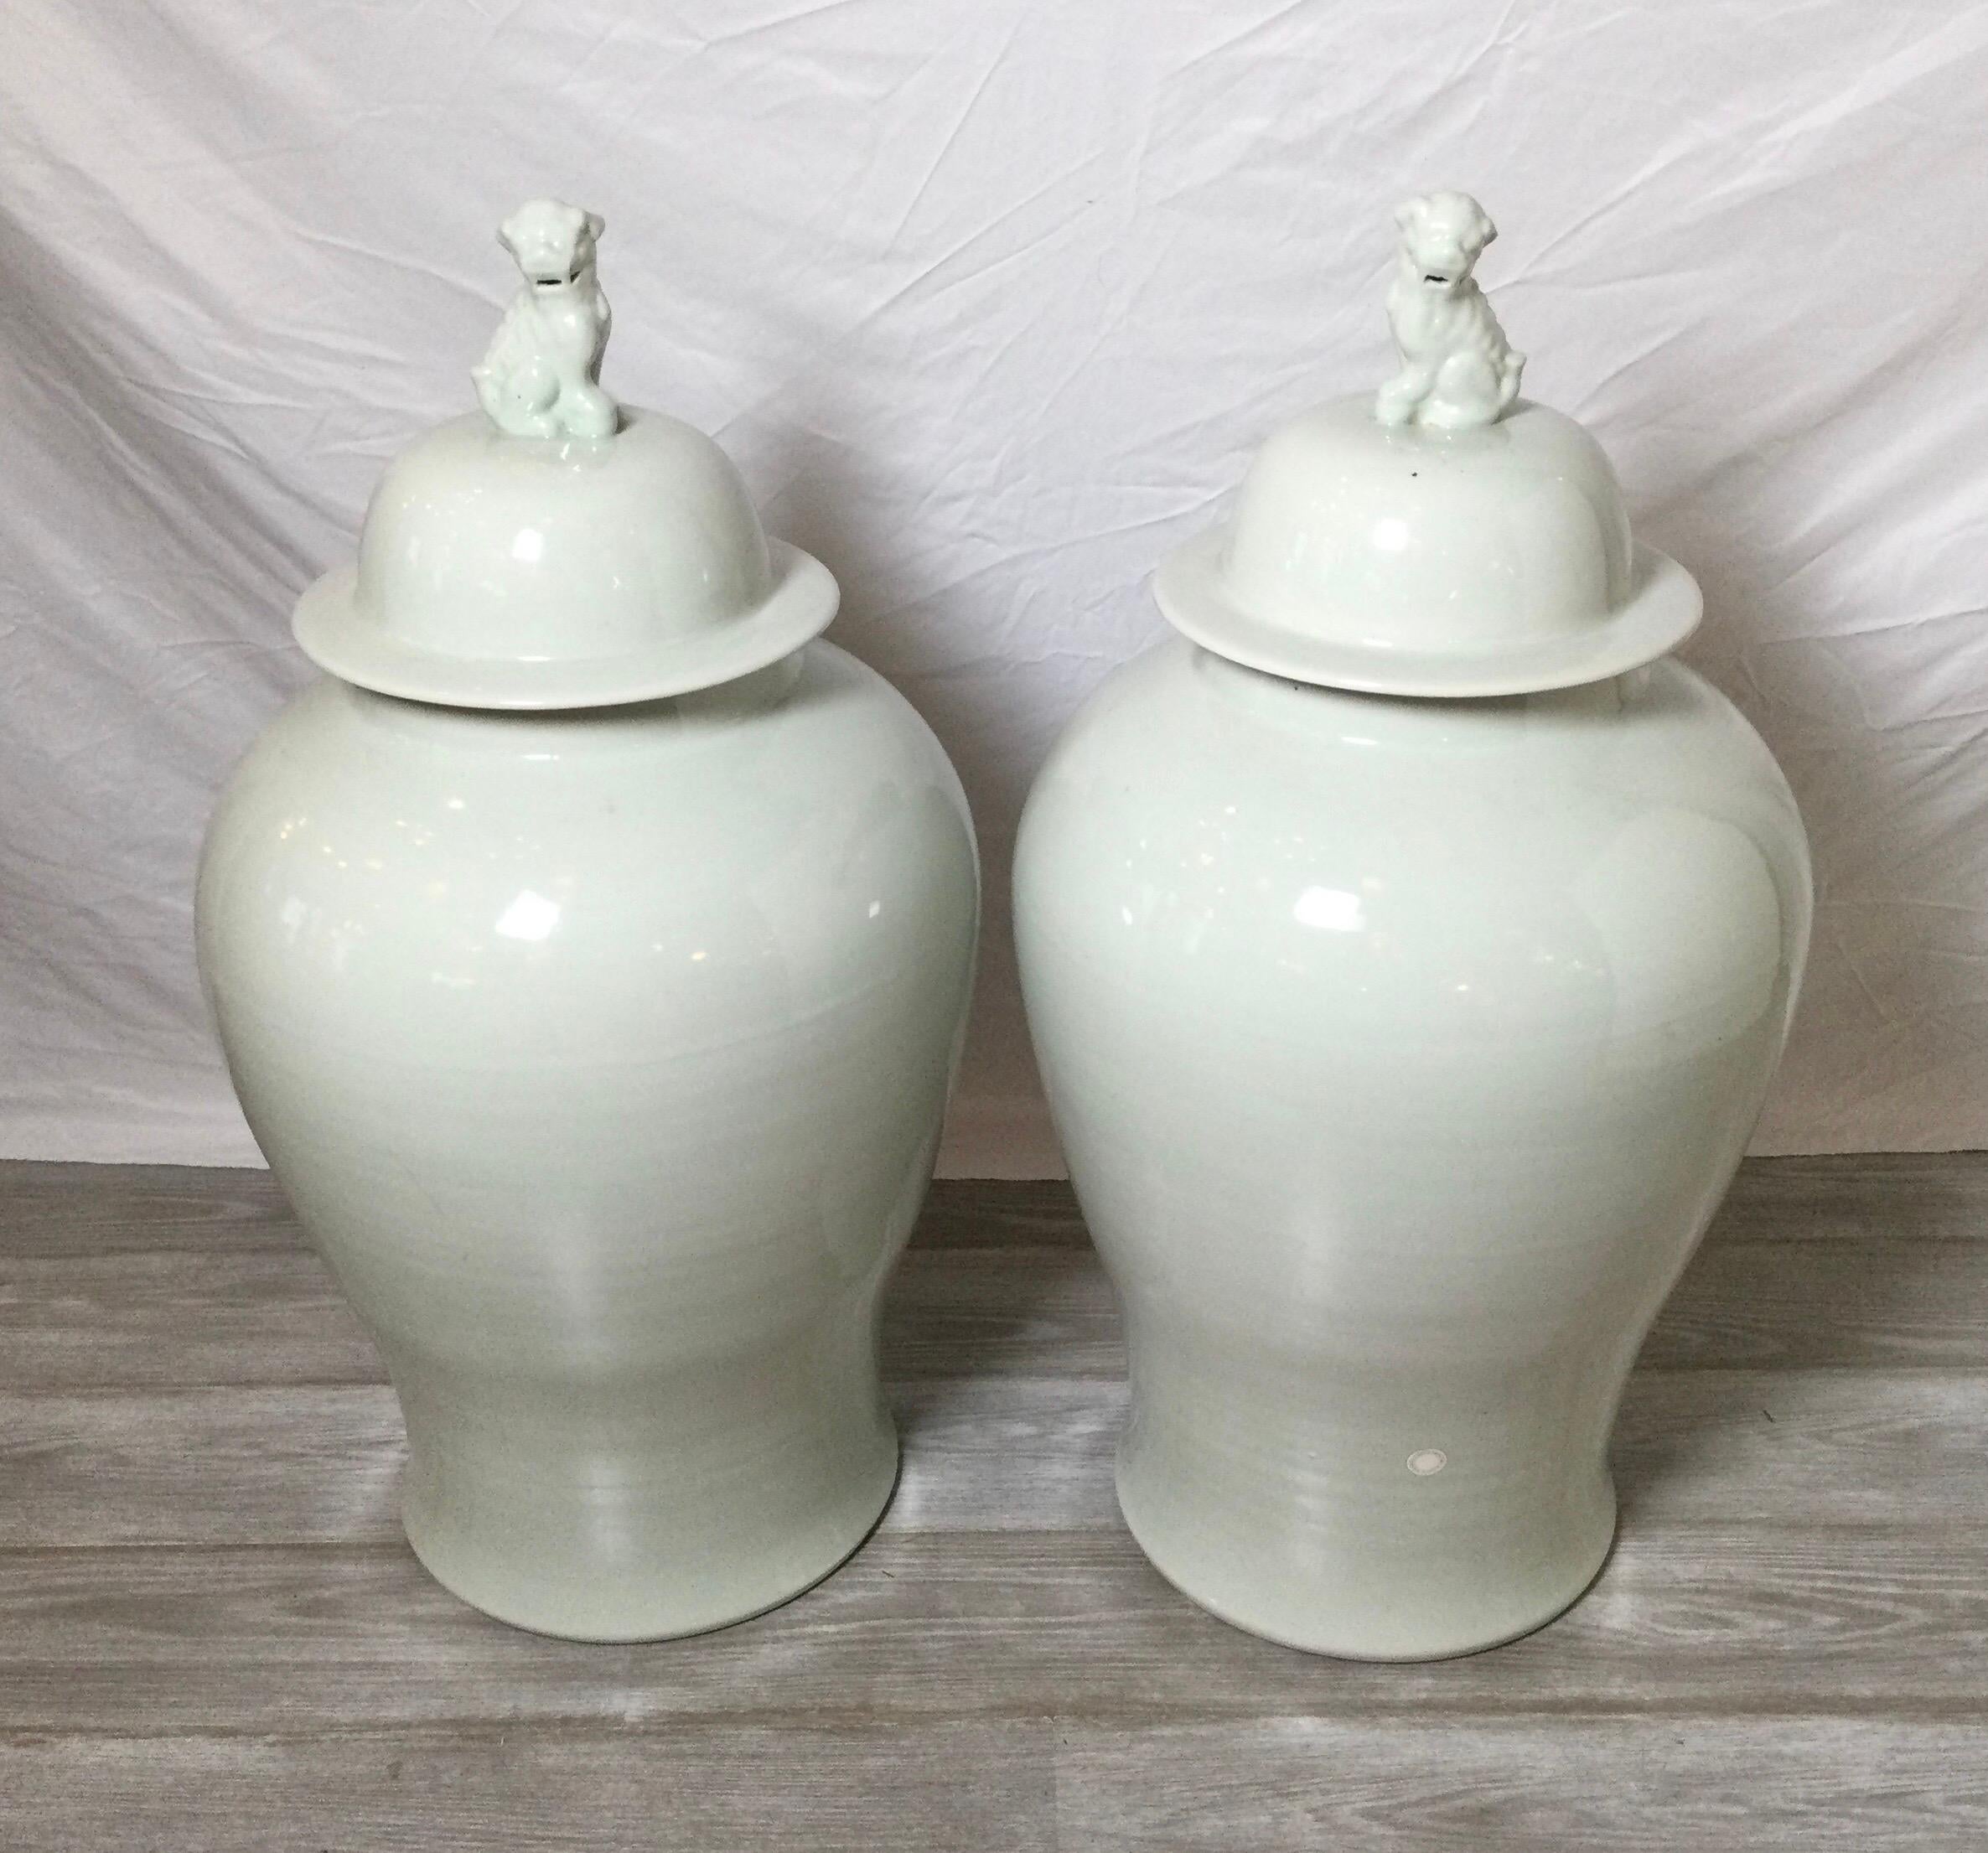 Pair of late 20th century off white Blanc De Chine Monumental porcelain temple jars 
Purchased at a top design retailer in Hong Kong, Charlotte Horstmann & Gerald Godfrey Ltd.
Dimensions: 18' Diameter x 31